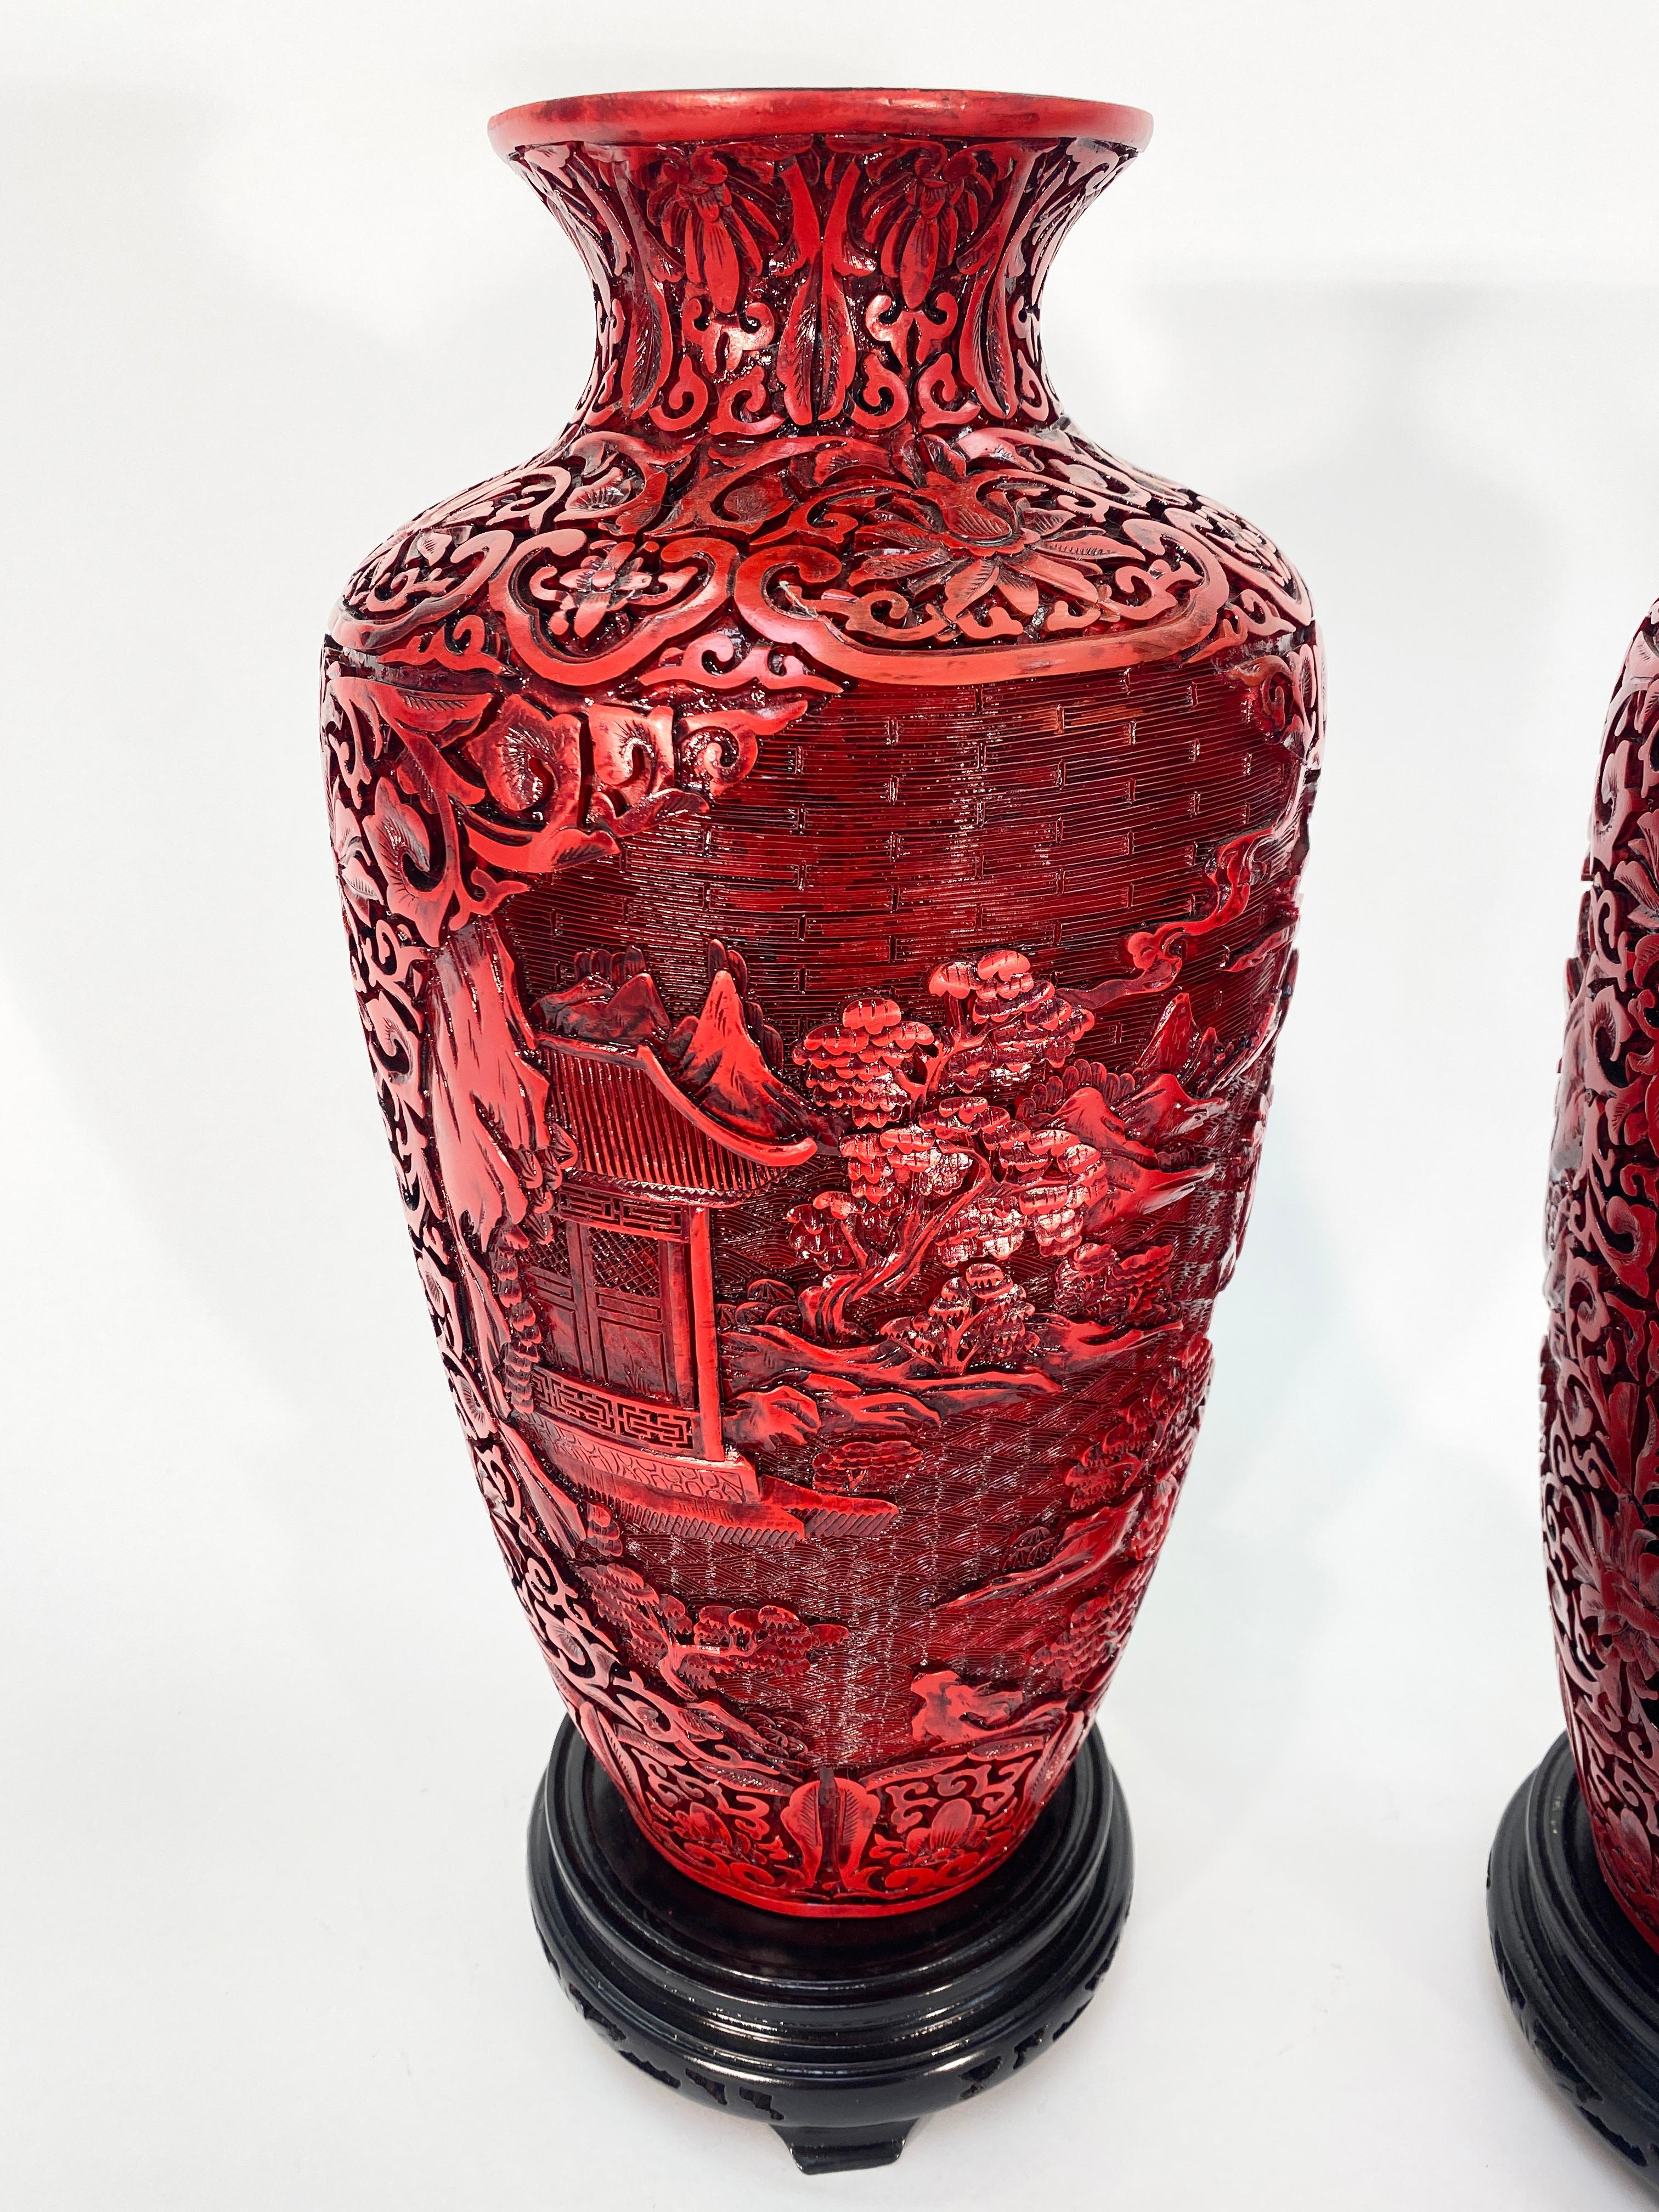 Gorgeous pair of midcentury cinnabar hand carved vases. Highly detailed carvings in the red lacquer. Paired with rosewood vase stands. 

Asian 20th century 

Measure: Height 17”
Width 7”.